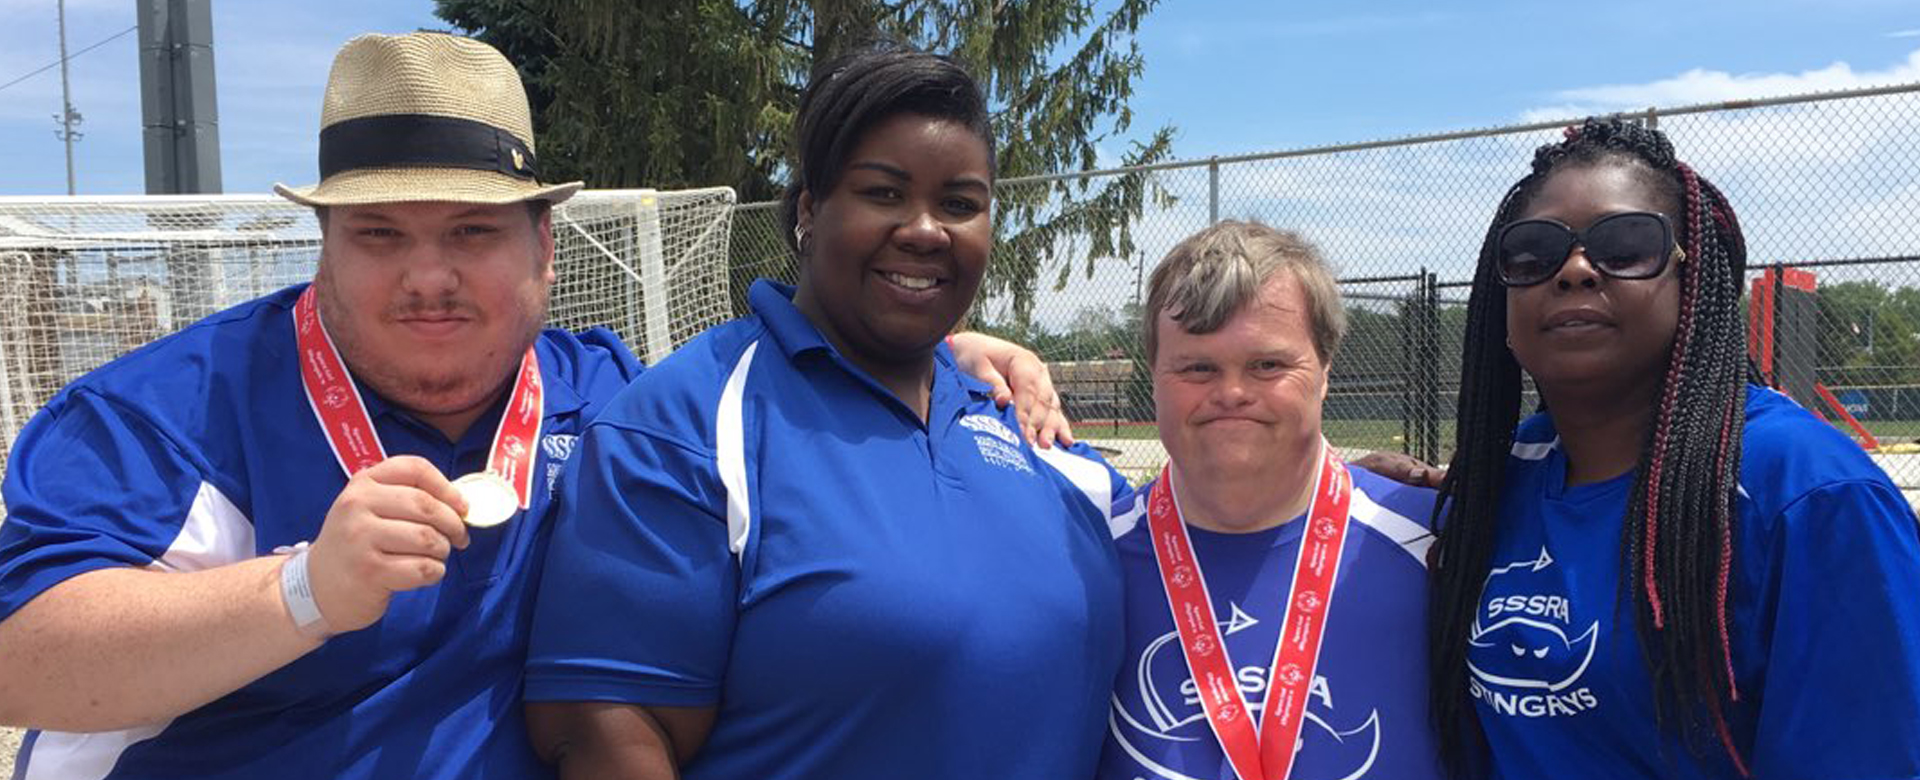 2 Special Olympics athletes and 2 Special Olympics coaches. The athletes are wearing medals.